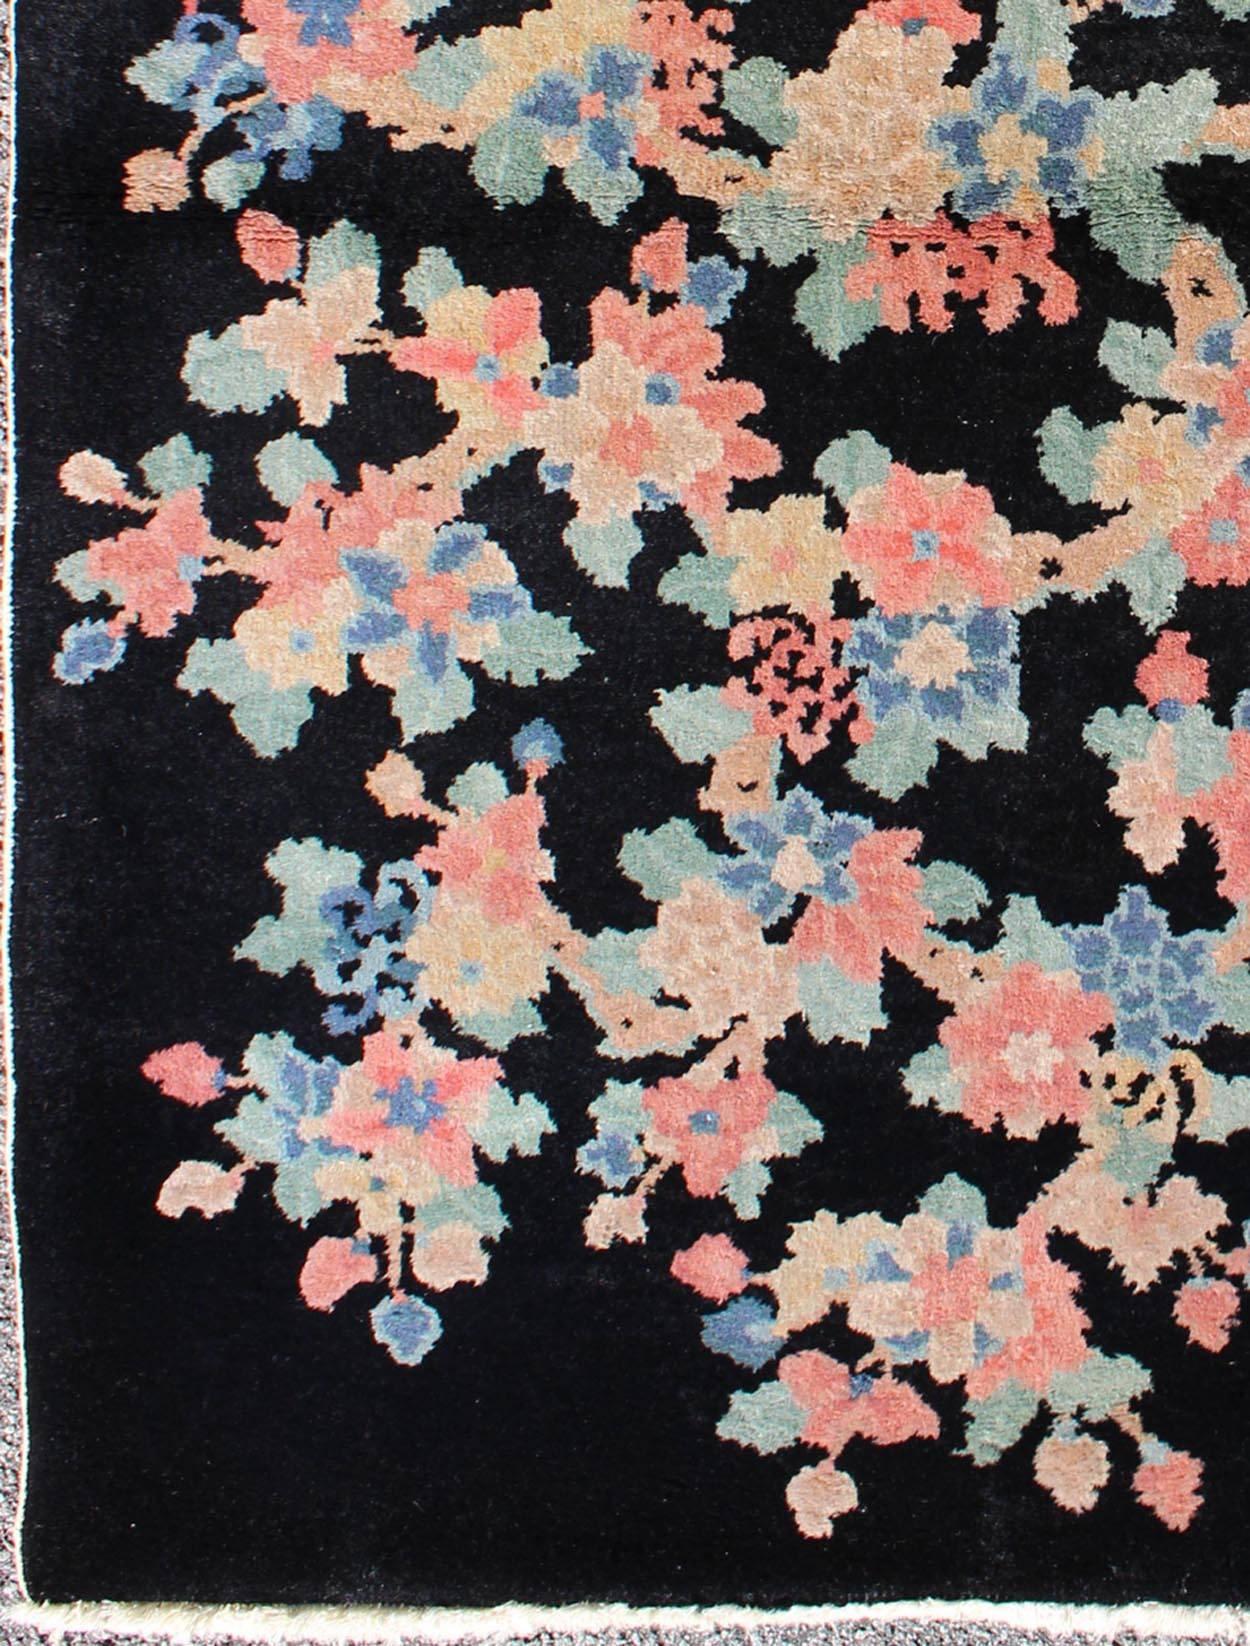 Art Deco Chinese rug with black background and flower bouquet in pastel colors, rug s12-0505, country of origin / type: China / Art Deco, circa 1920

Handwoven in the first part of 20th century (circa 1920), this antique Chinese rug features a